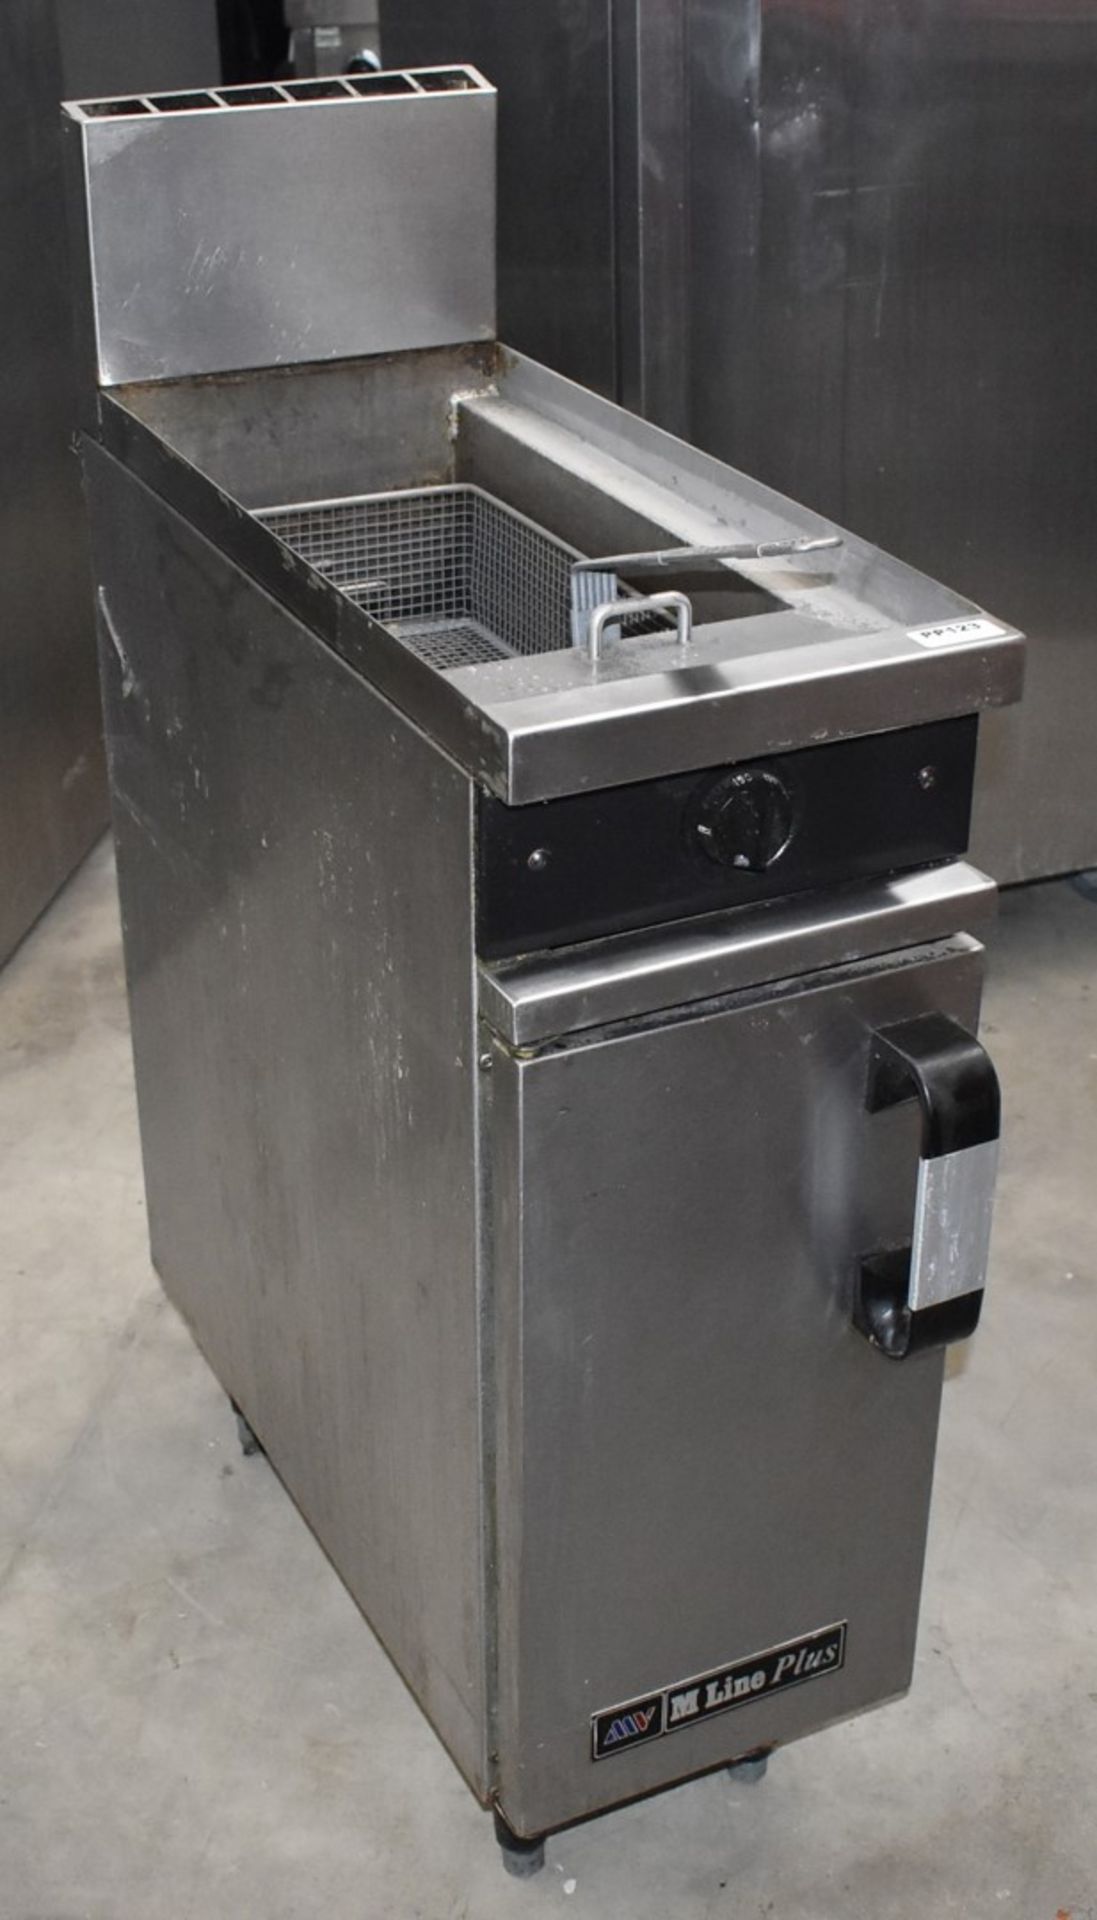 1 x Moorwood Vulcan M Line Plus Single Tank 30cm Gas Fryer - Model 30FD - Recently Removed From a - Image 3 of 12